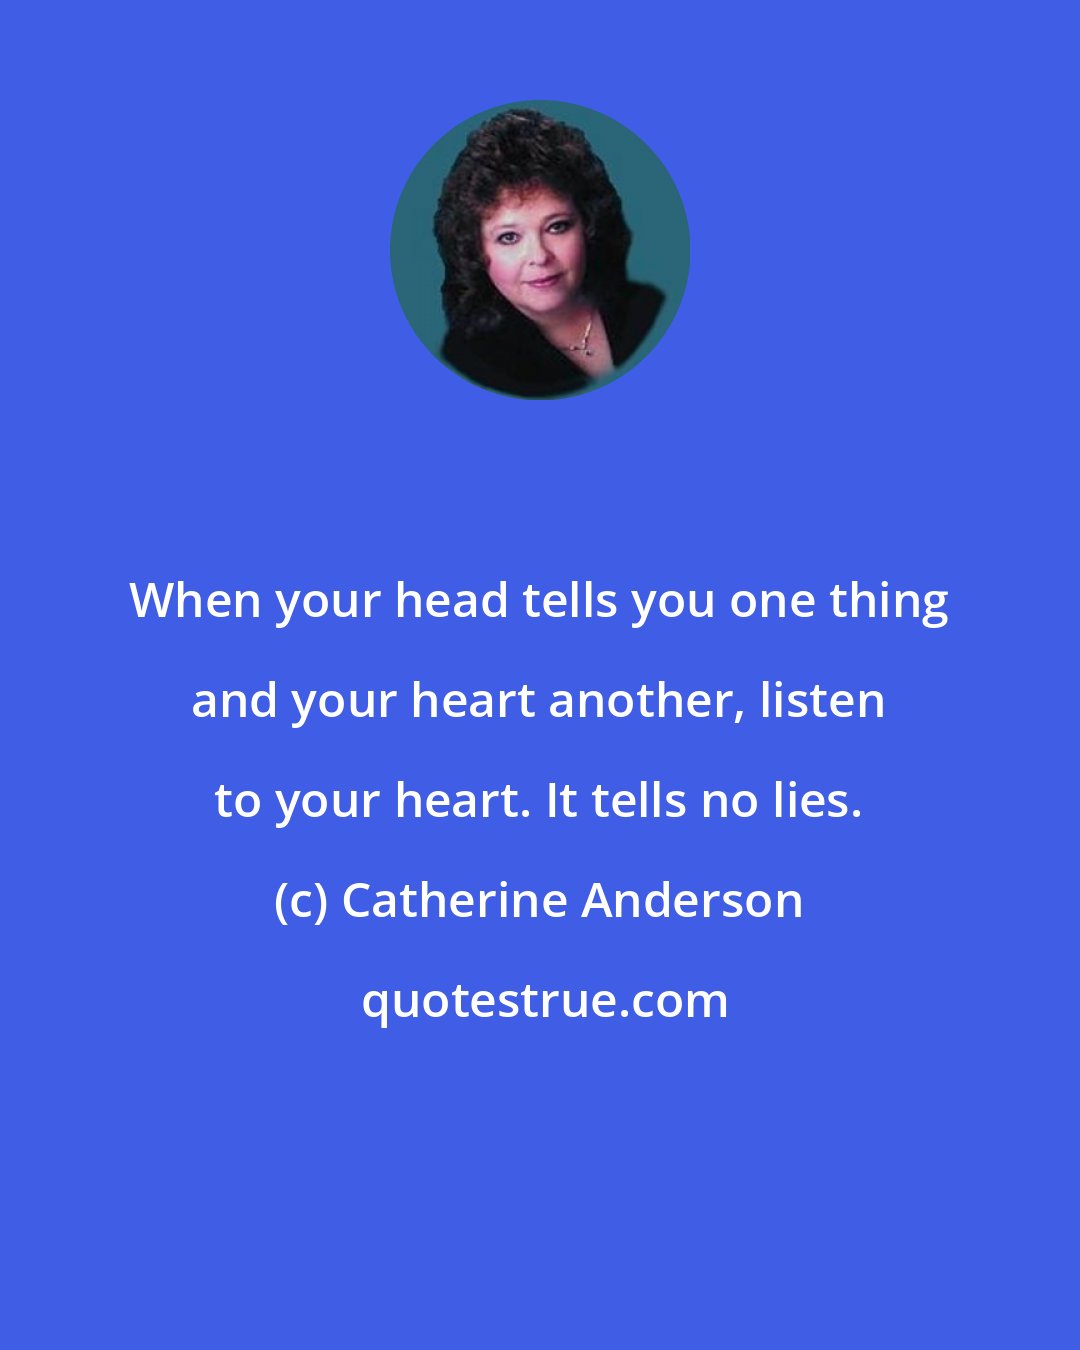 Catherine Anderson: When your head tells you one thing and your heart another, listen to your heart. It tells no lies.